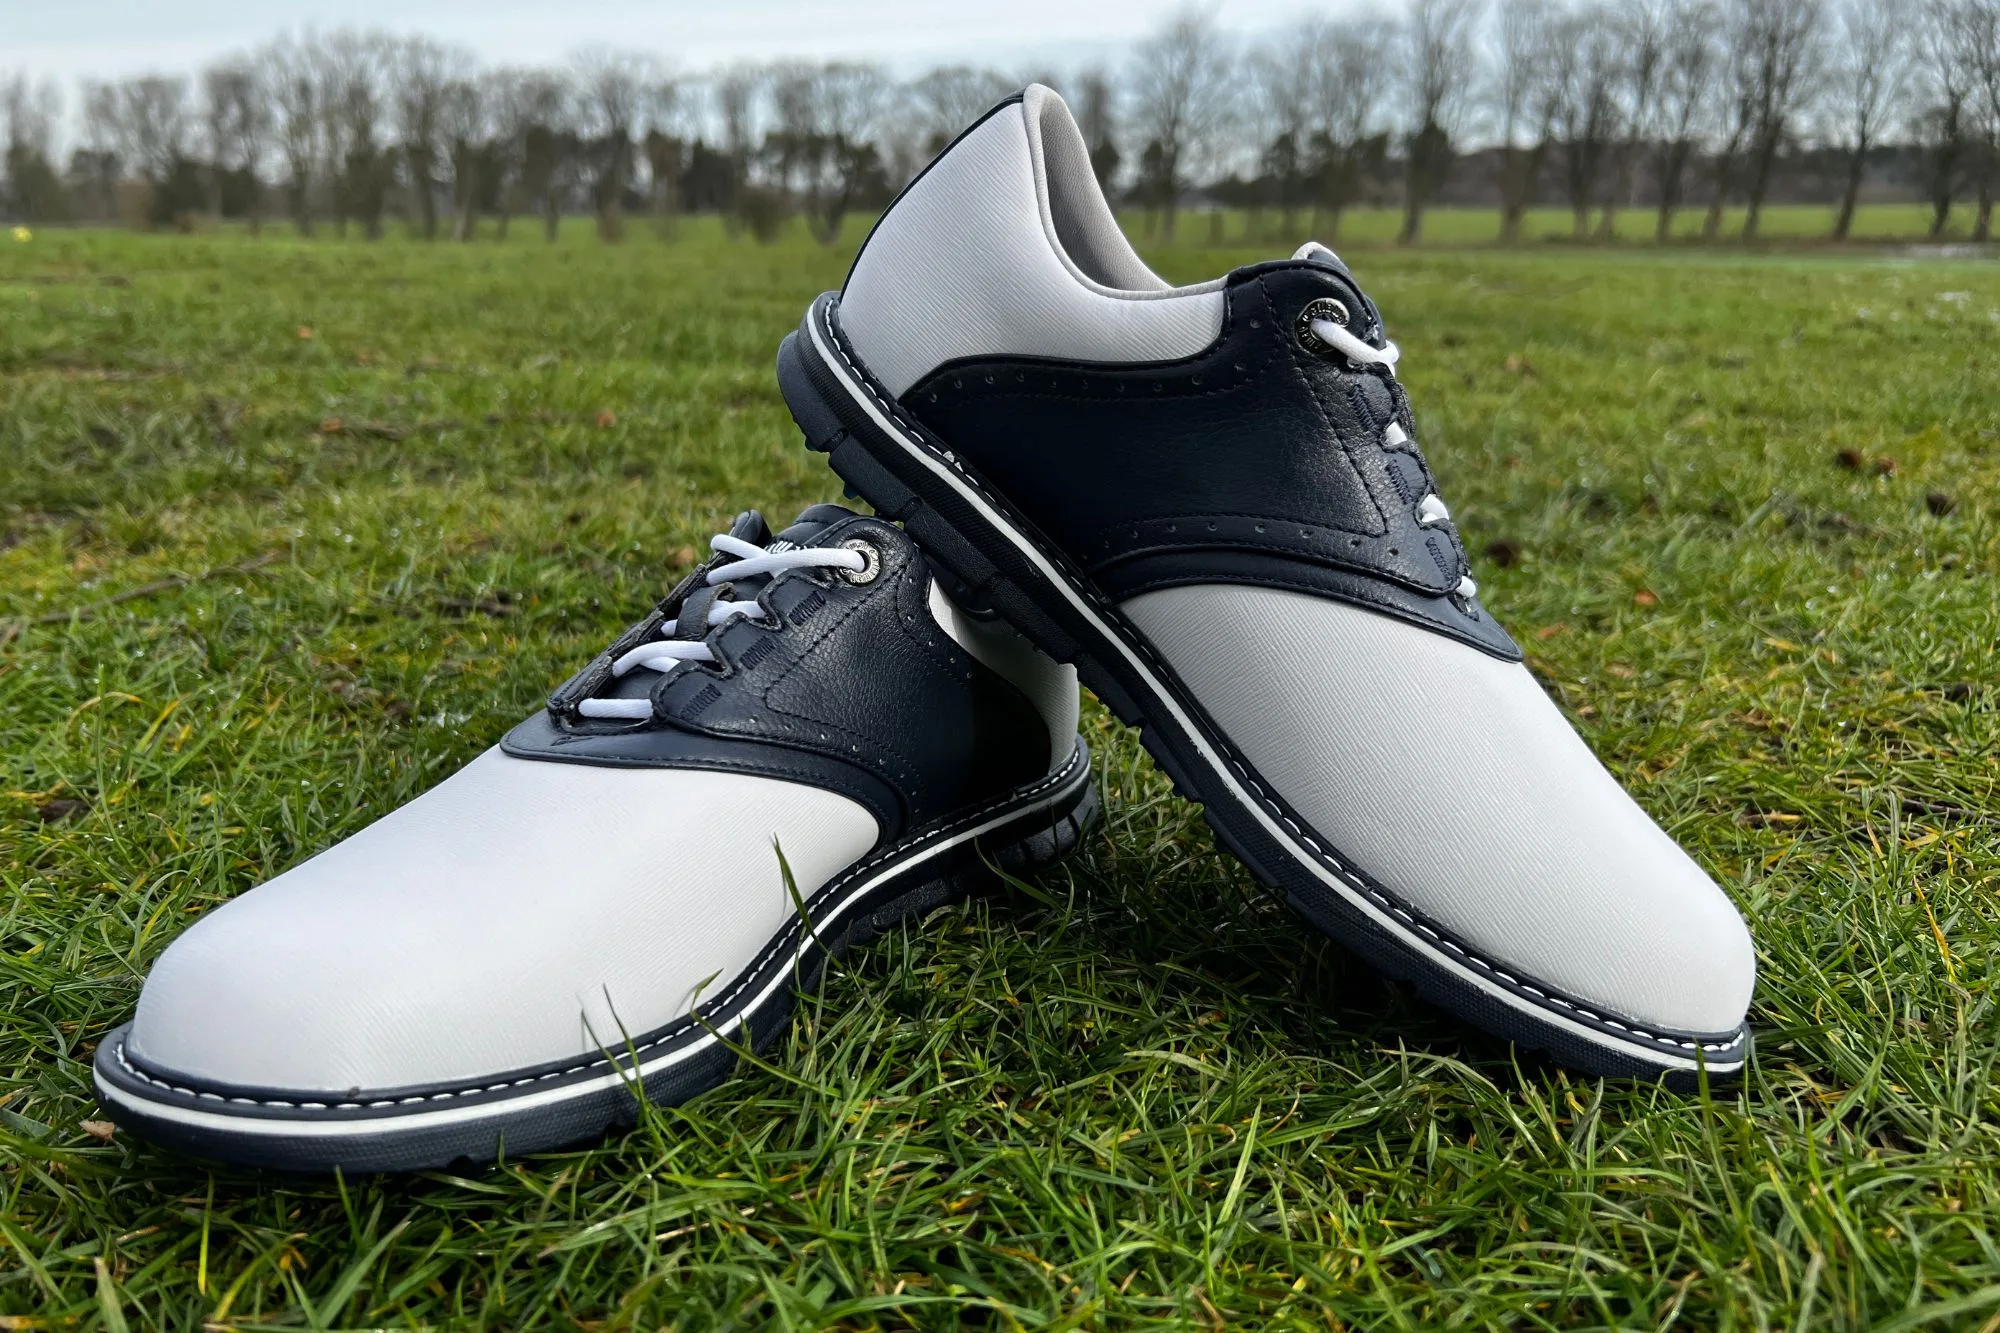 Callaway Lux Tour Series golf shoes review